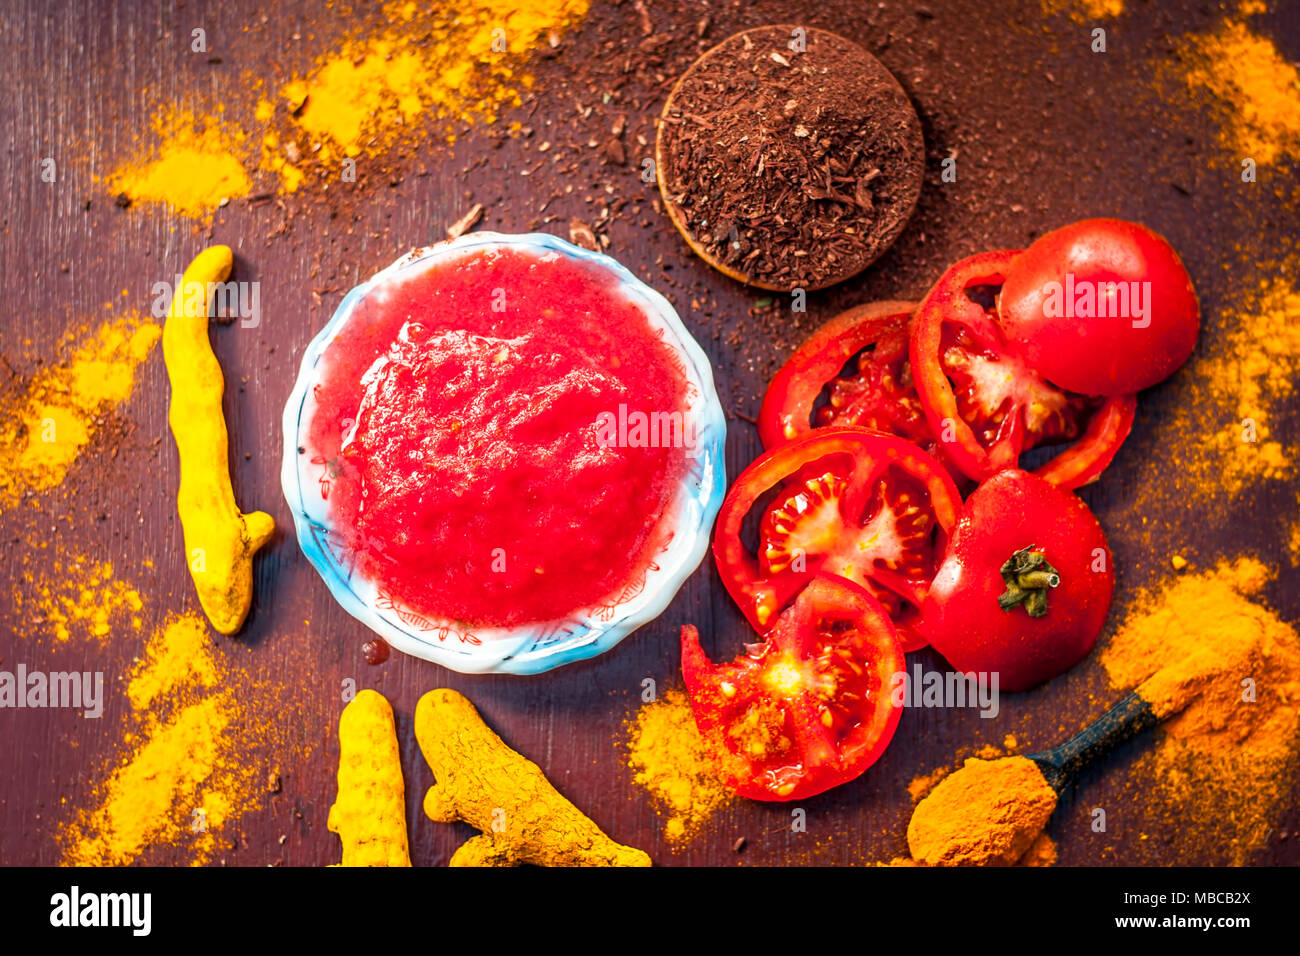 Close up of Tomato puree,sandalwood,turmeric and its powder on a wooden surface.It is used to clear the dark heads and black skin. Stock Photo